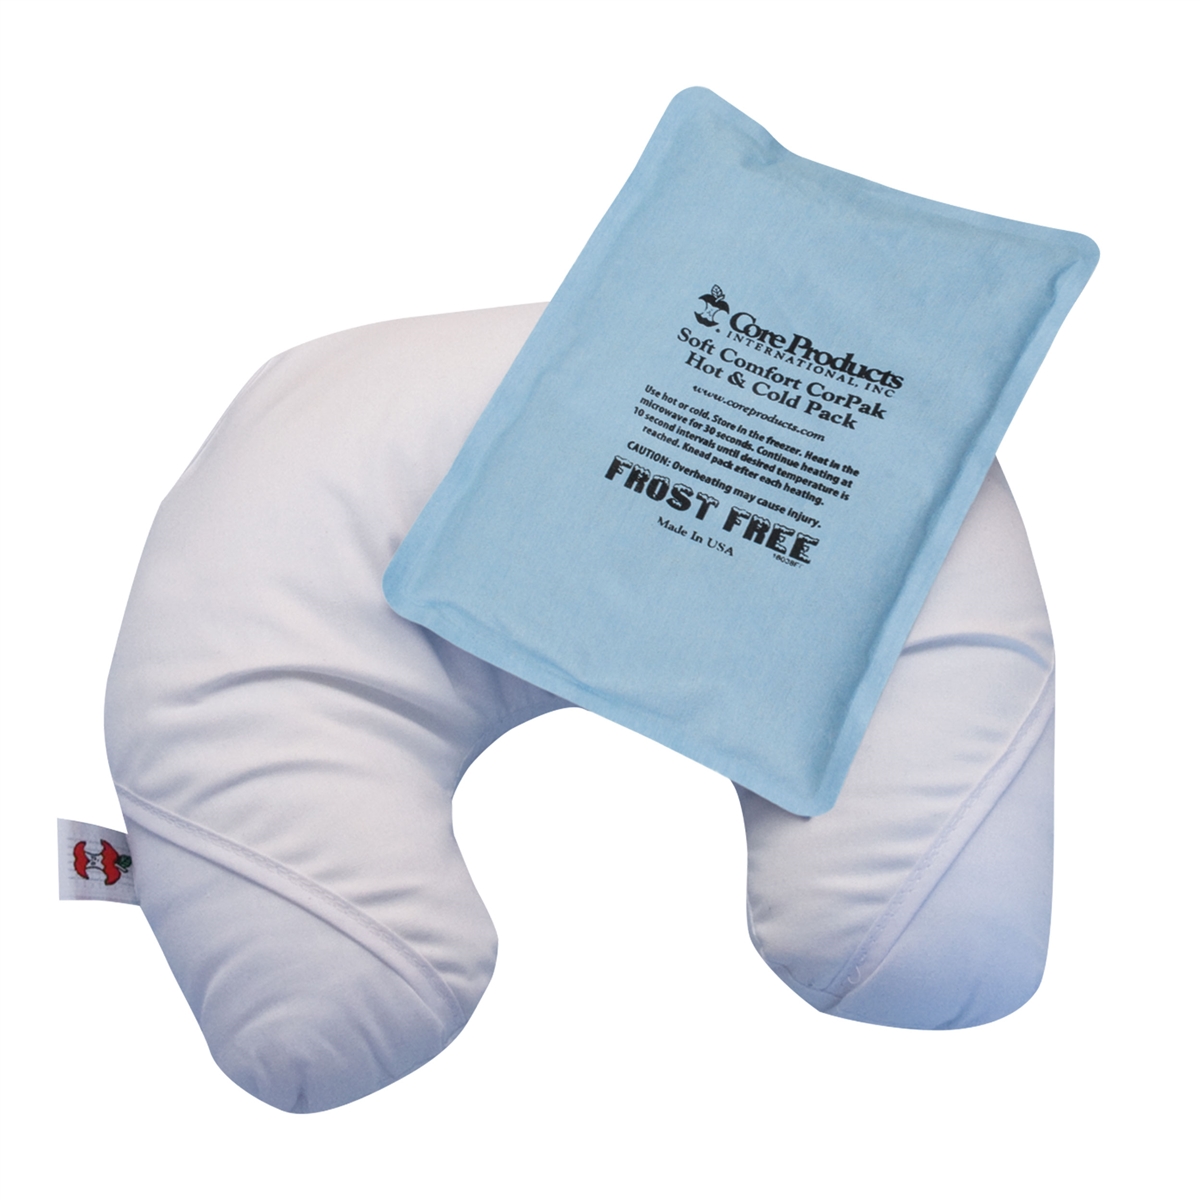  Core Products Headache Ice Pillow with Removable Soft